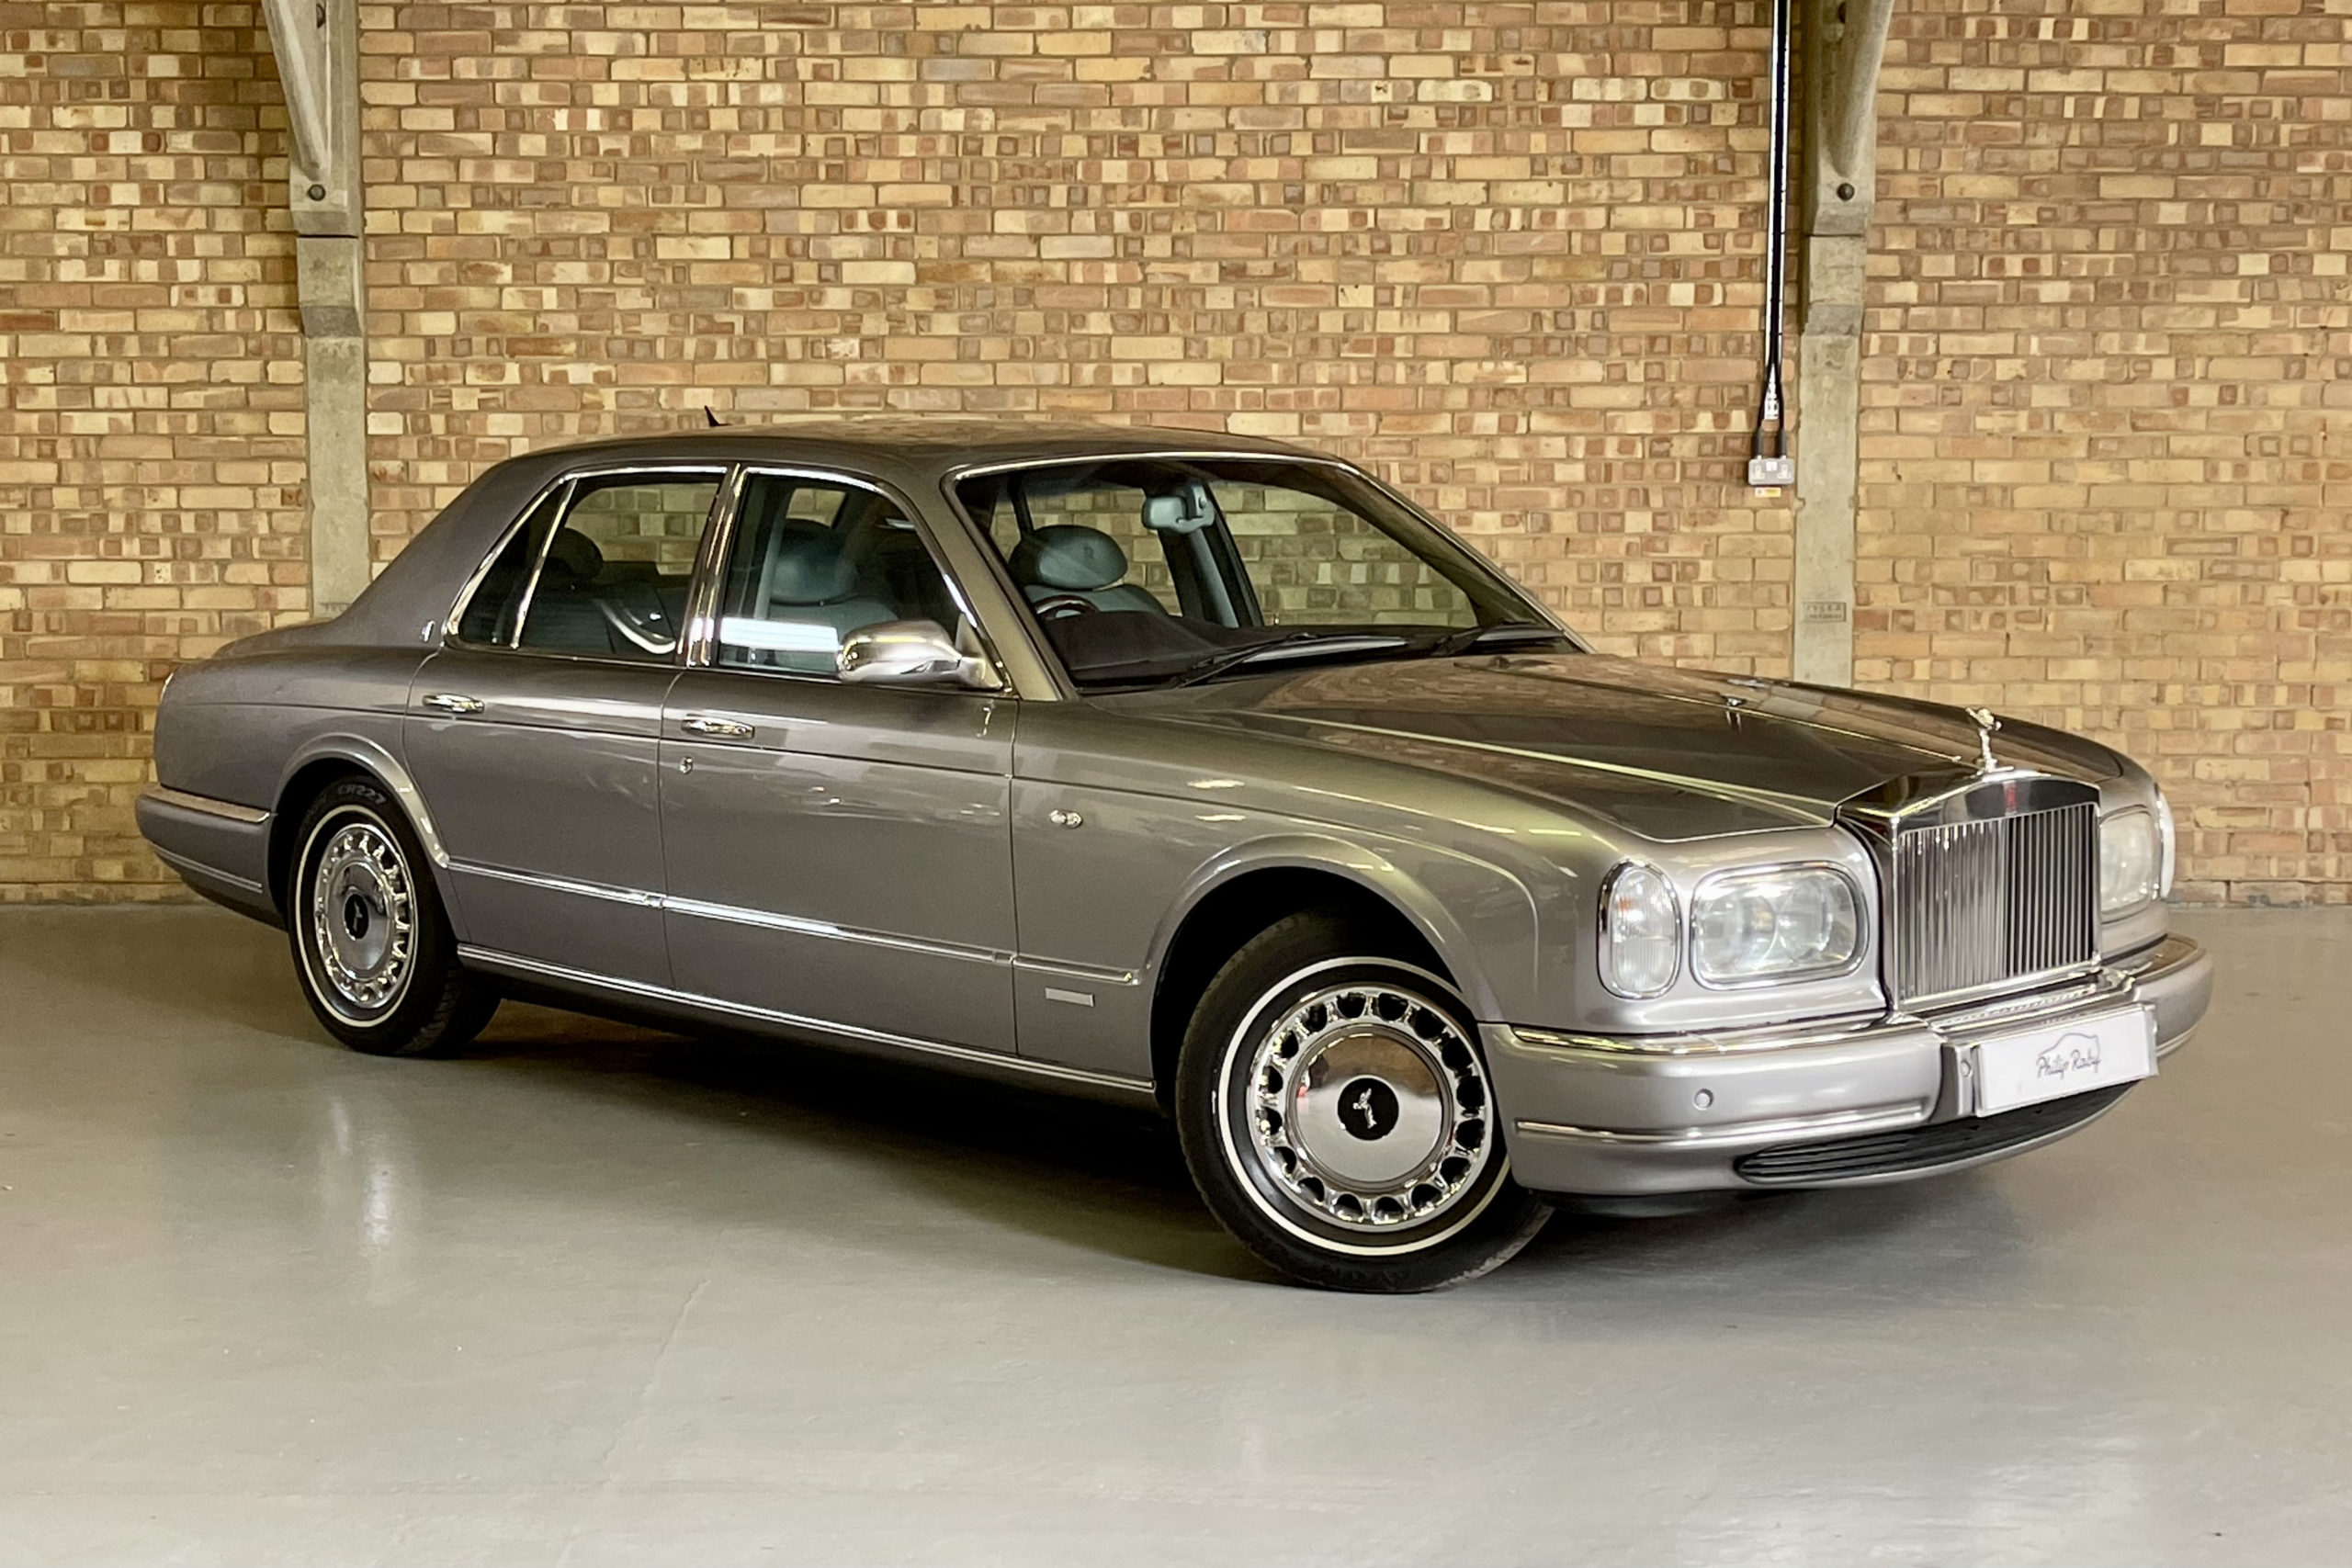 Rolls Royce Silver Seraph Last of Line - Philip Raby Specialist Cars